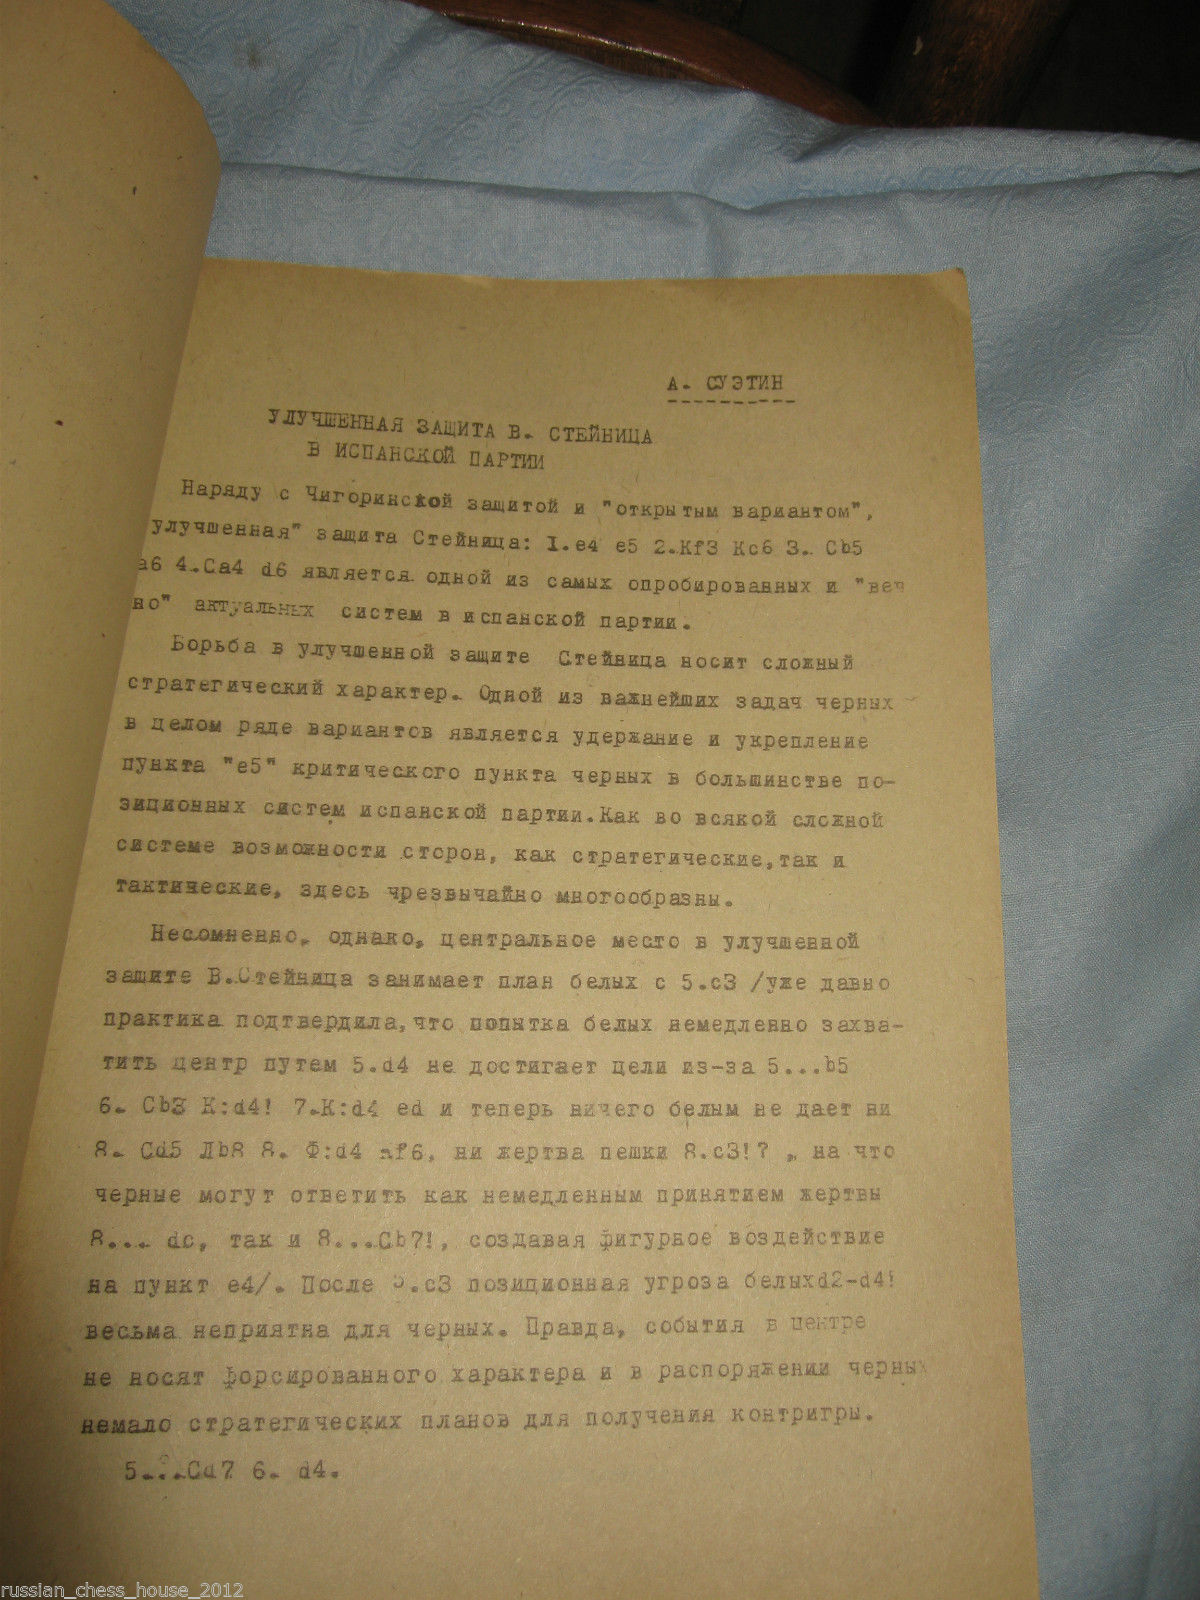 11161.Chess grand format book: Improved Steinitz's defence in Ruy Lopez. Riga 1969